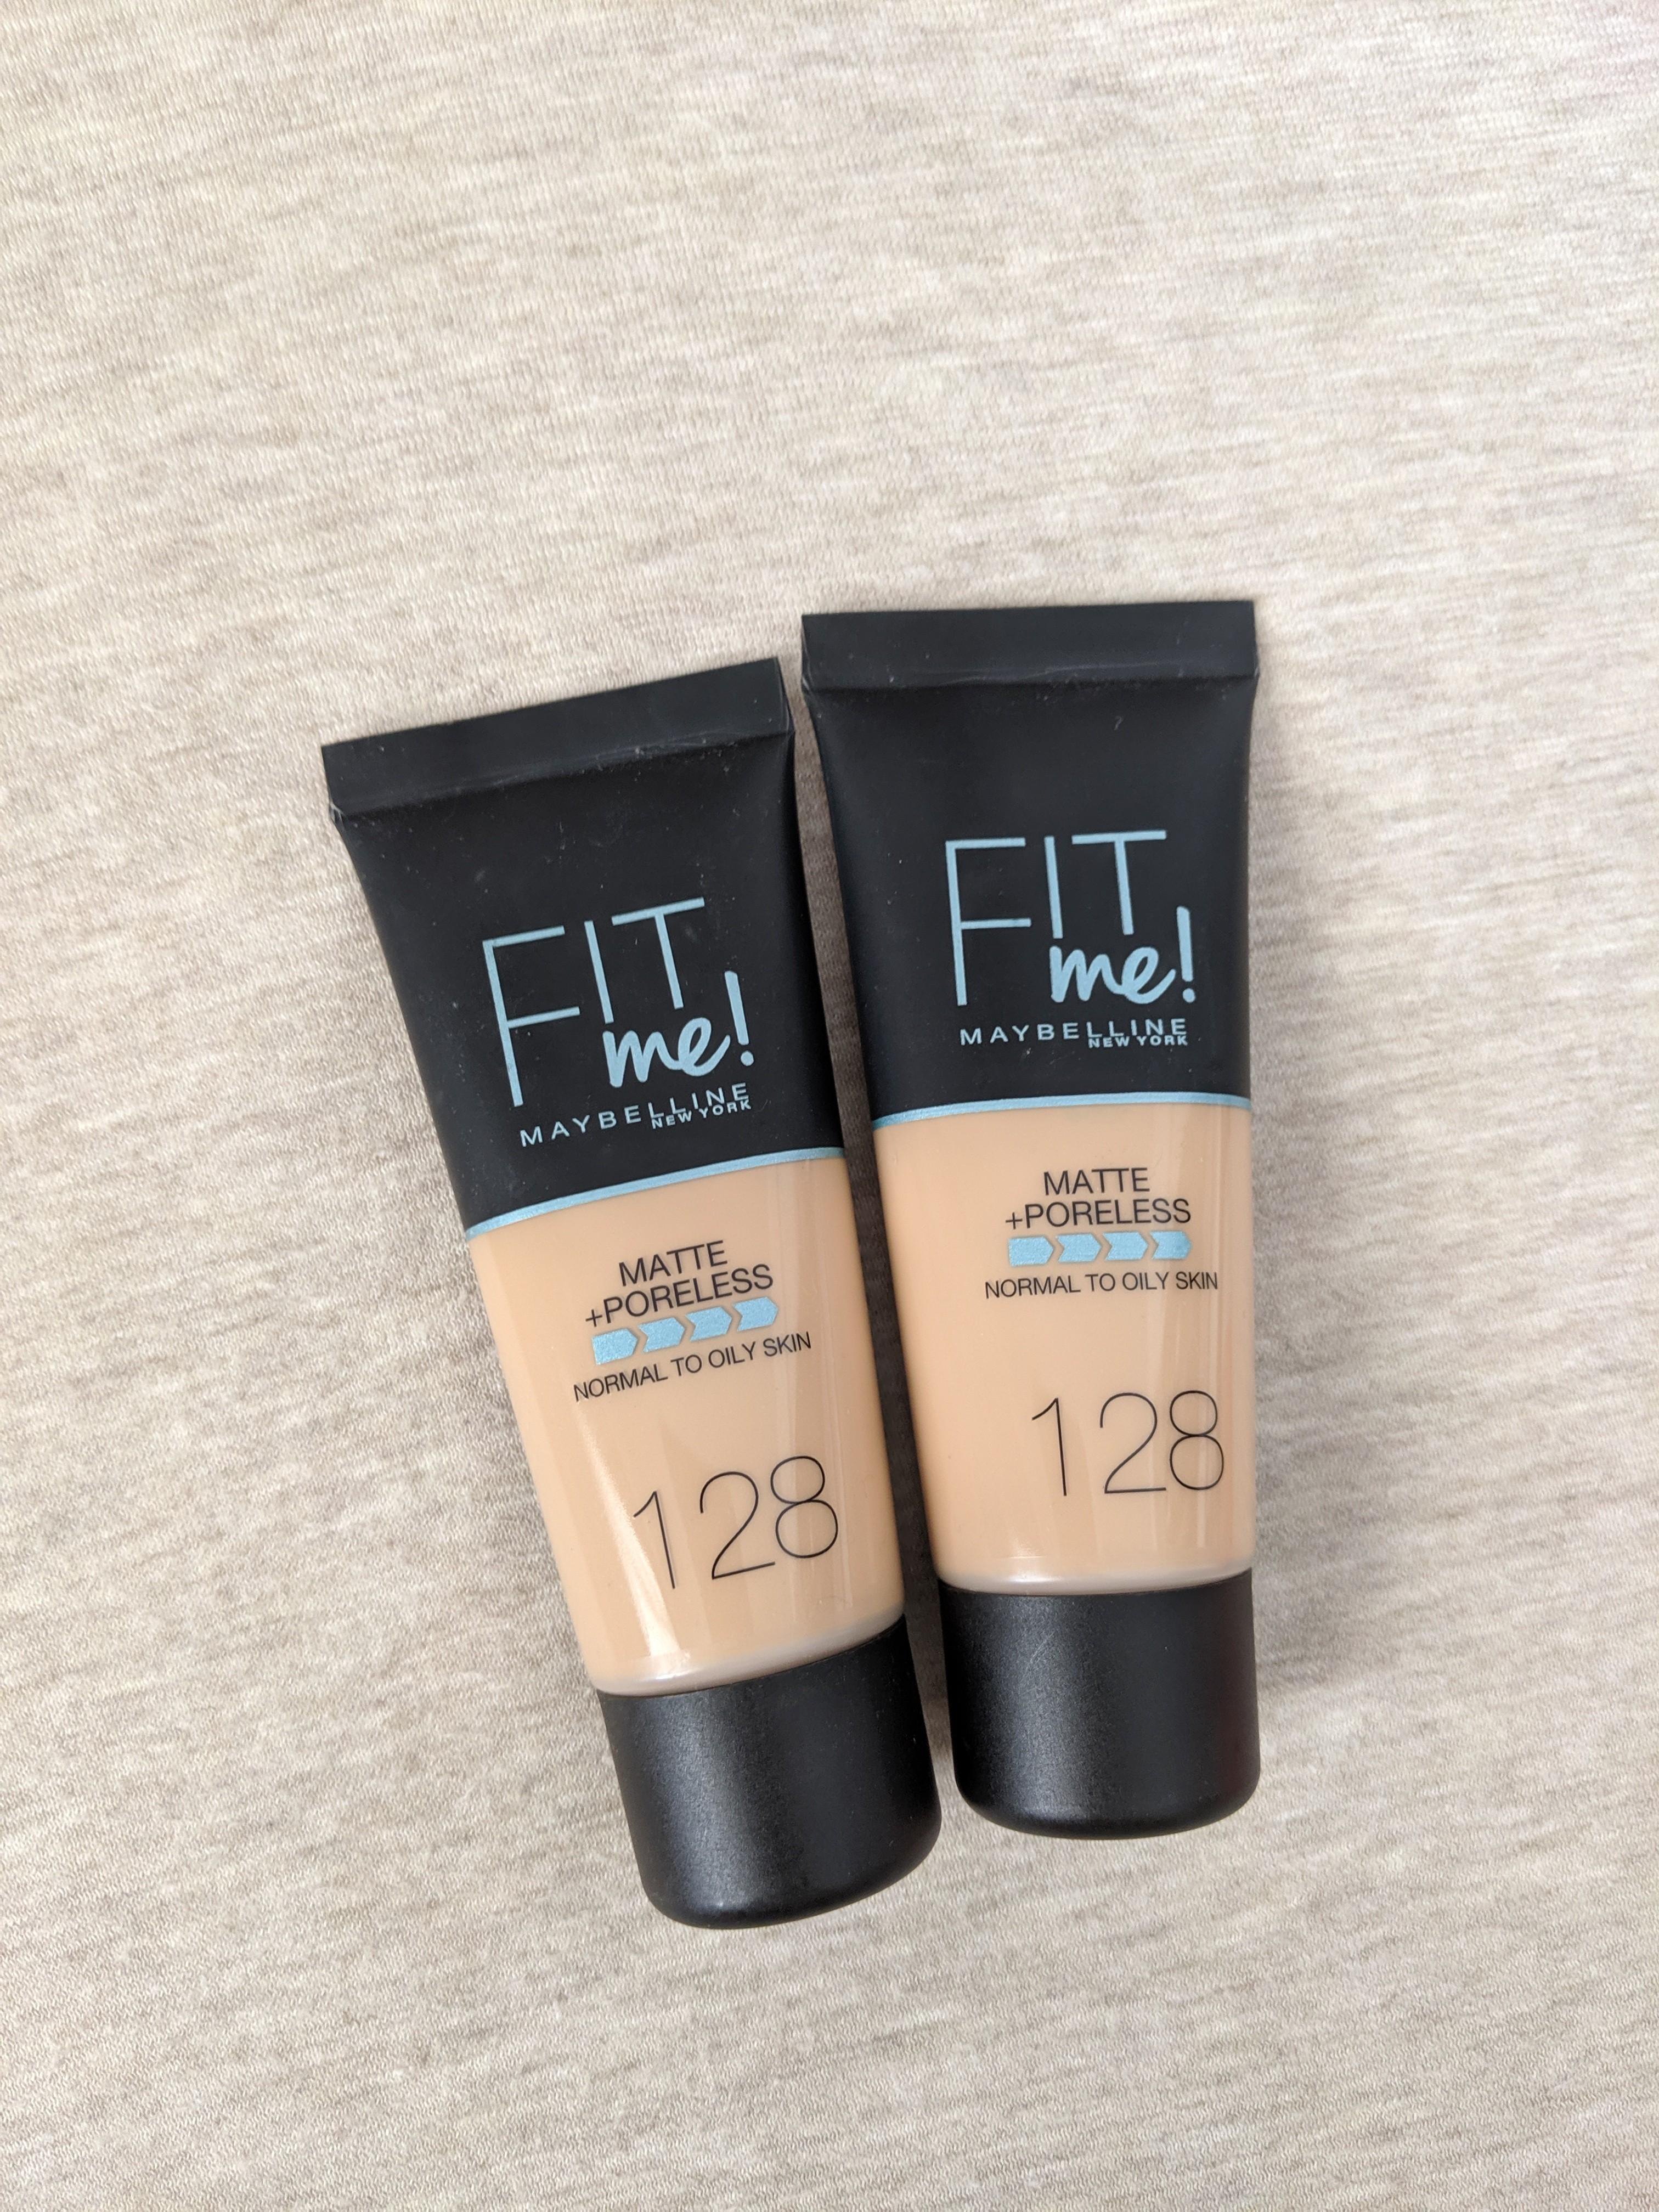 Fit me! Maybelline Face, Makeup Carousell Foundation New & Poreless Matte Beauty on York 128, Care, Personal Shade